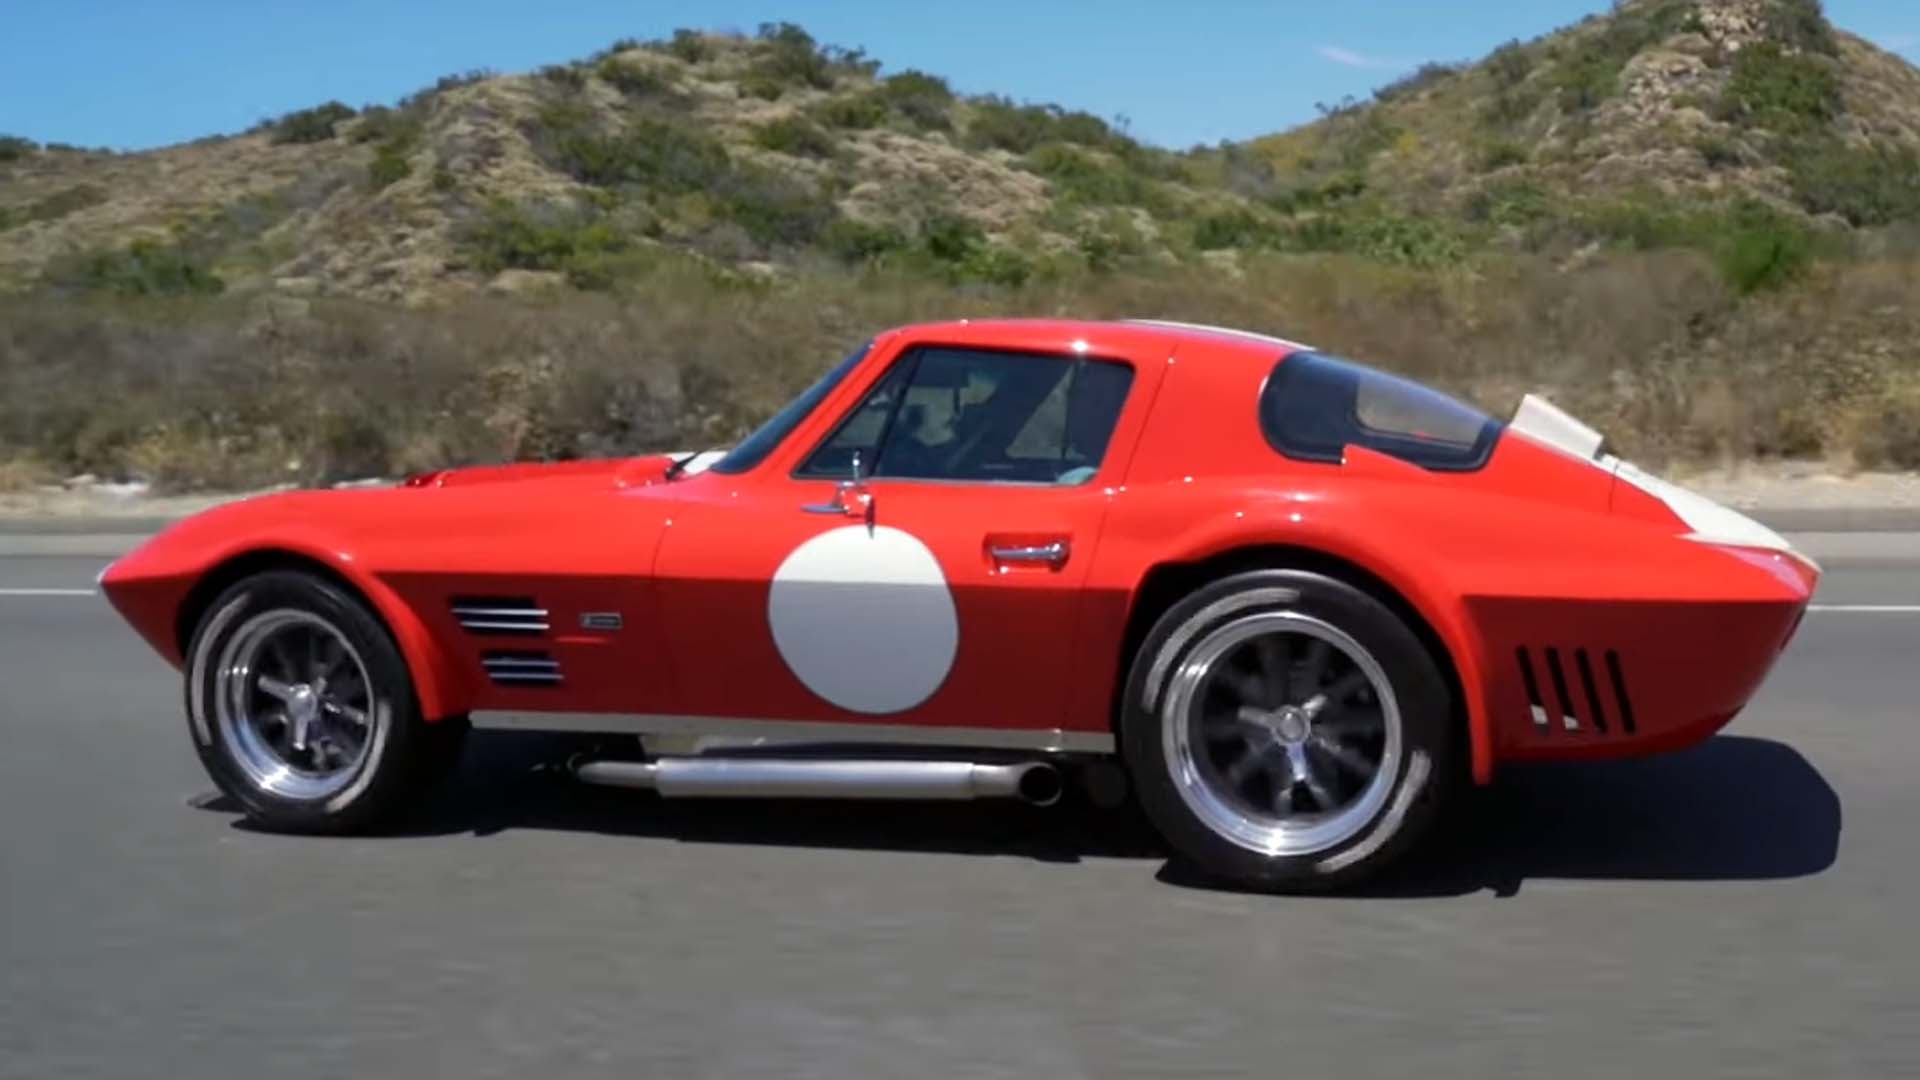 Learn more about the legendary Grand Sport Corvette from Superformance.